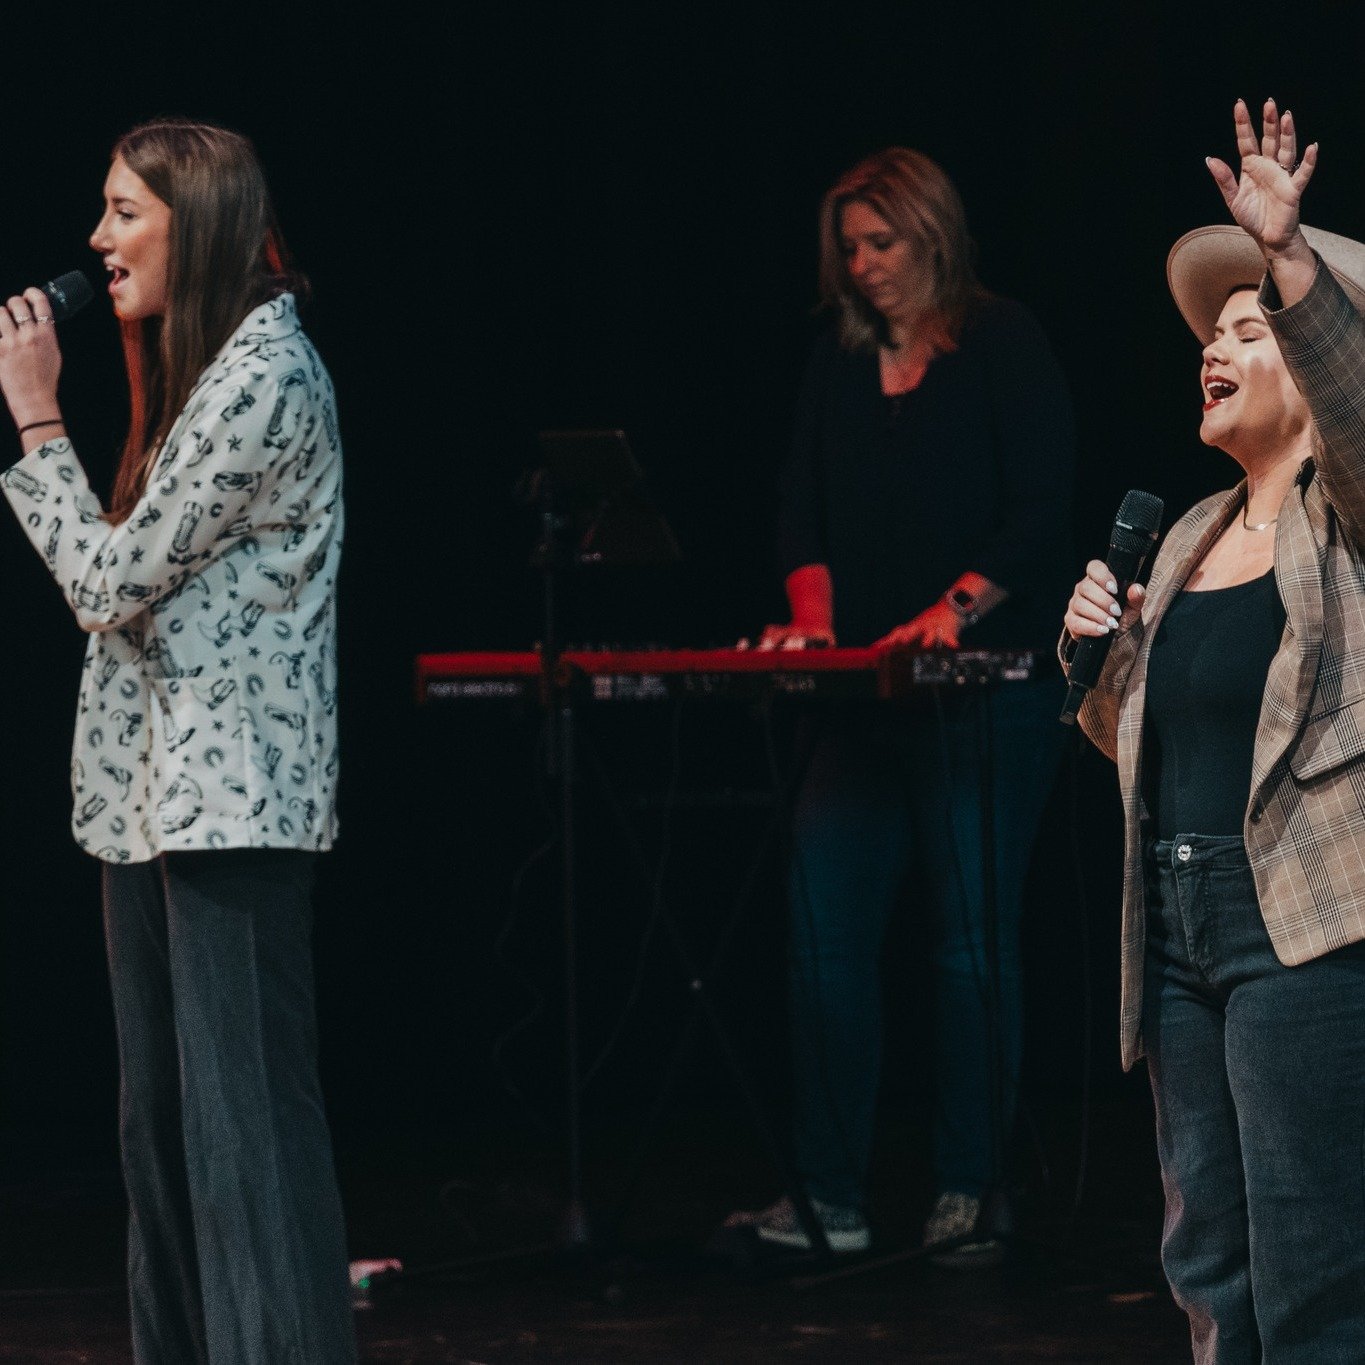 What an incredible weekend! God is doing so much in our lives and the life of our church! If you missed Sunday, you can still hear the powerful message Pastor Nate shared on our podcast! Just search &quot;Vintage Church Liberty Hill&quot; wherever yo